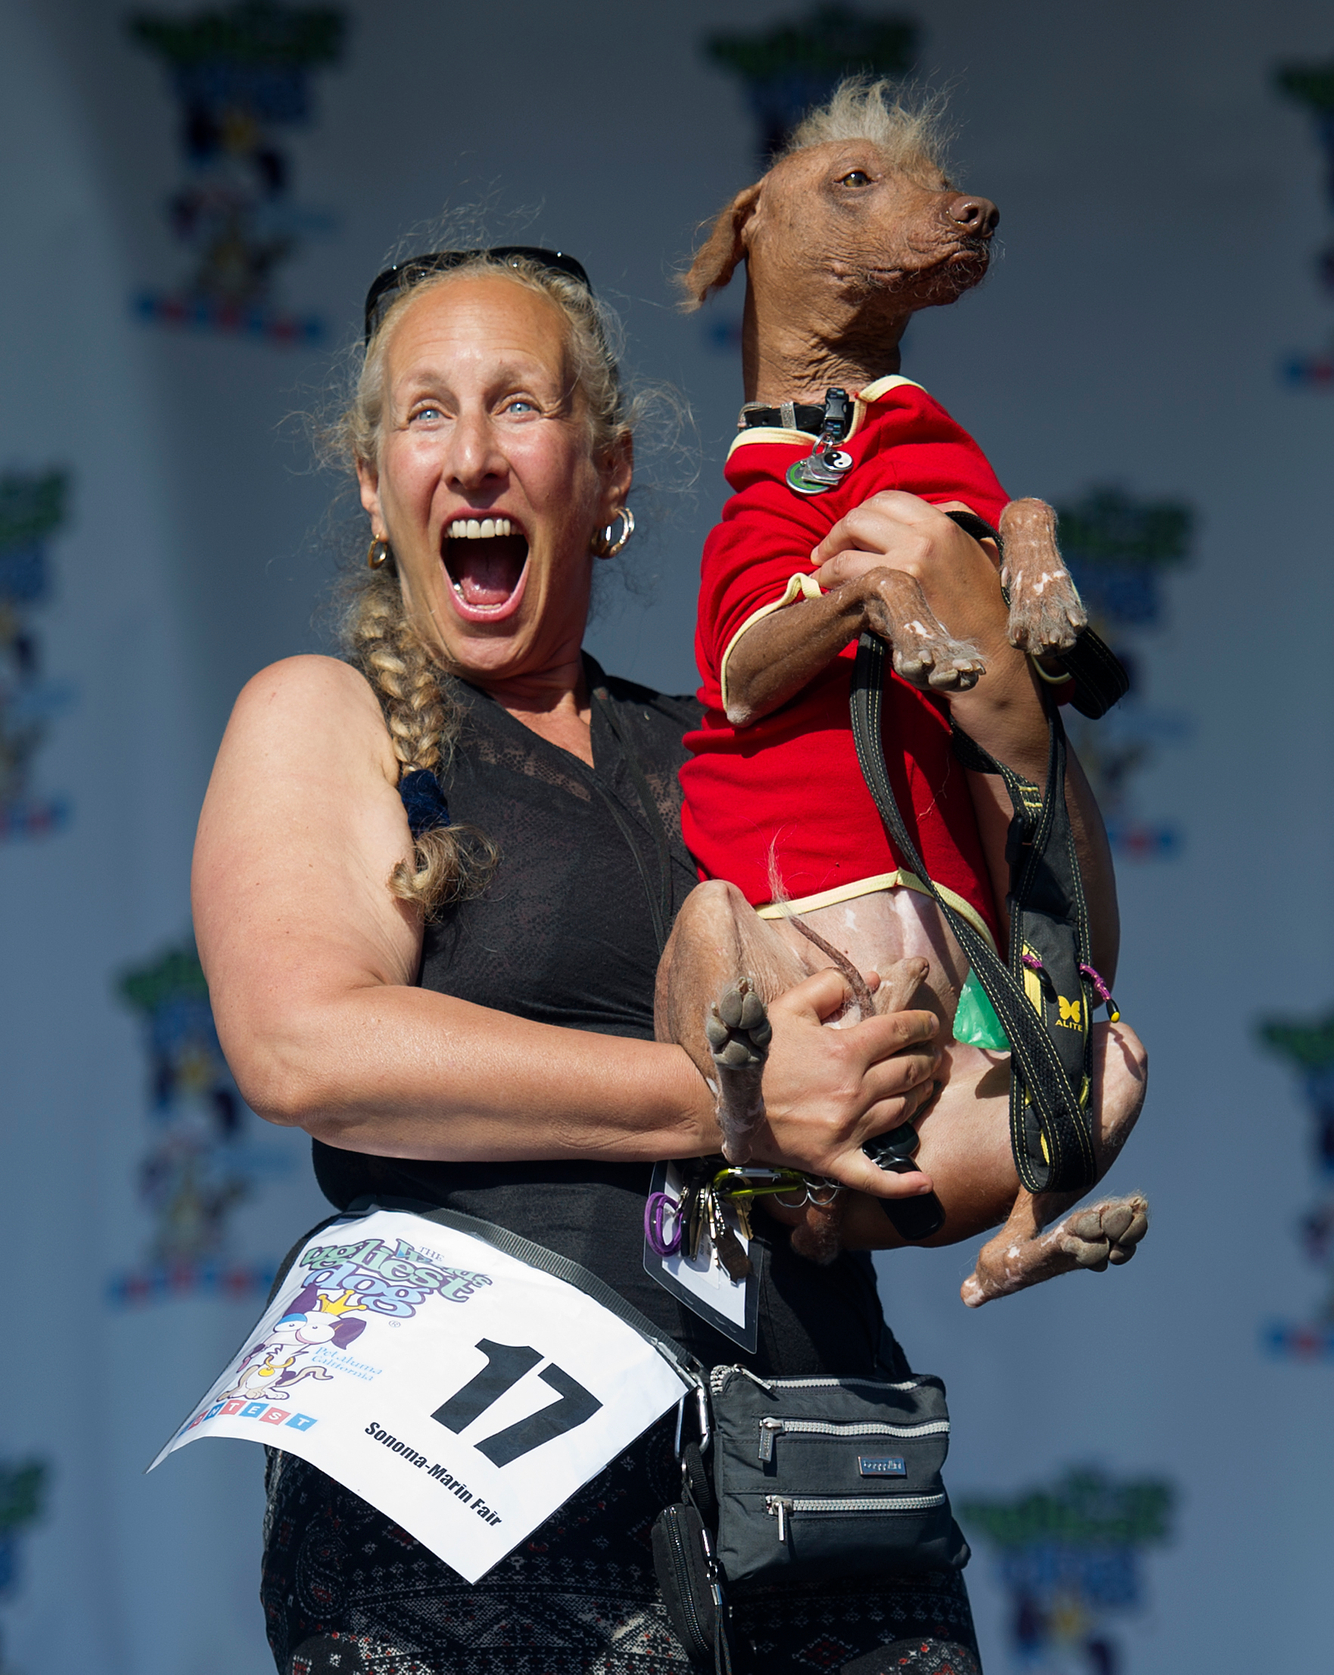 UGLY DOGS: A contestant displays her dog in the World's Ugliest Dog competition